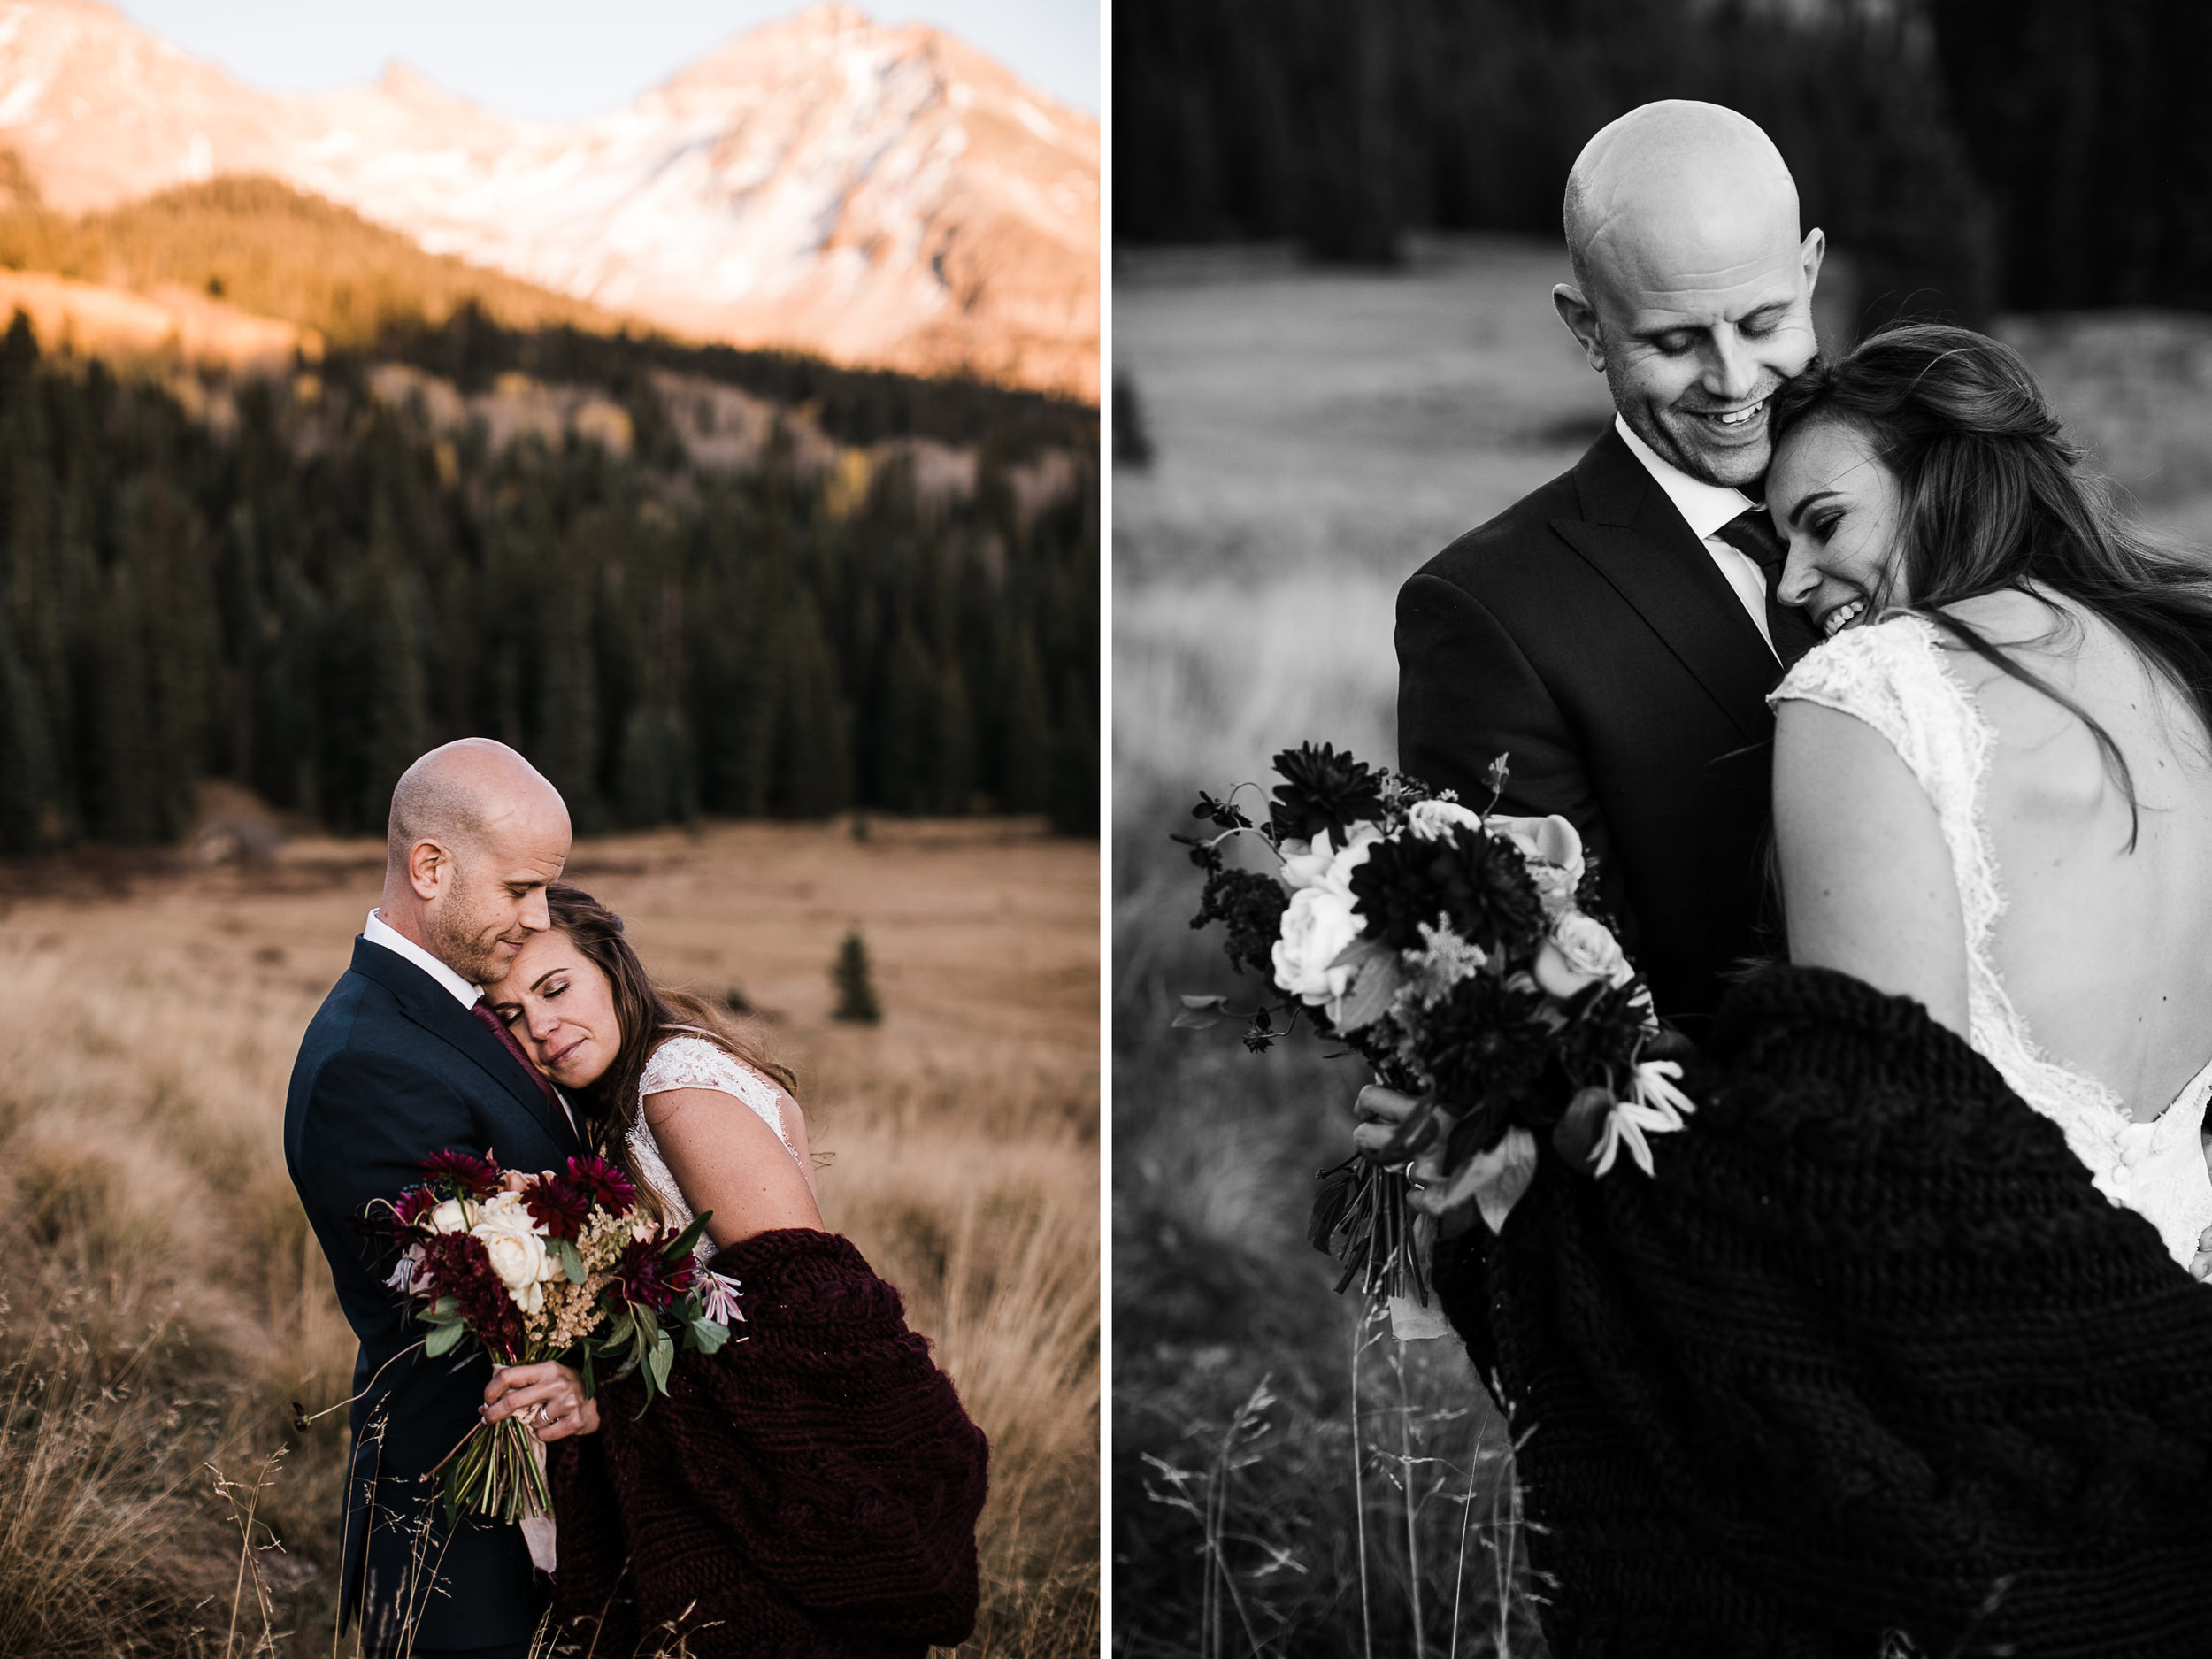 JENNY + ASHLEY'S MOUNTAINTOP INTIMATE WEDDING | TELLURIDE, COLORADO ELOPEMENT PHOTOGRAPHER | FALL MOUNTAIN WEDDING INSPIRATION | the hearnes adventure photography | www.thehearnes.com